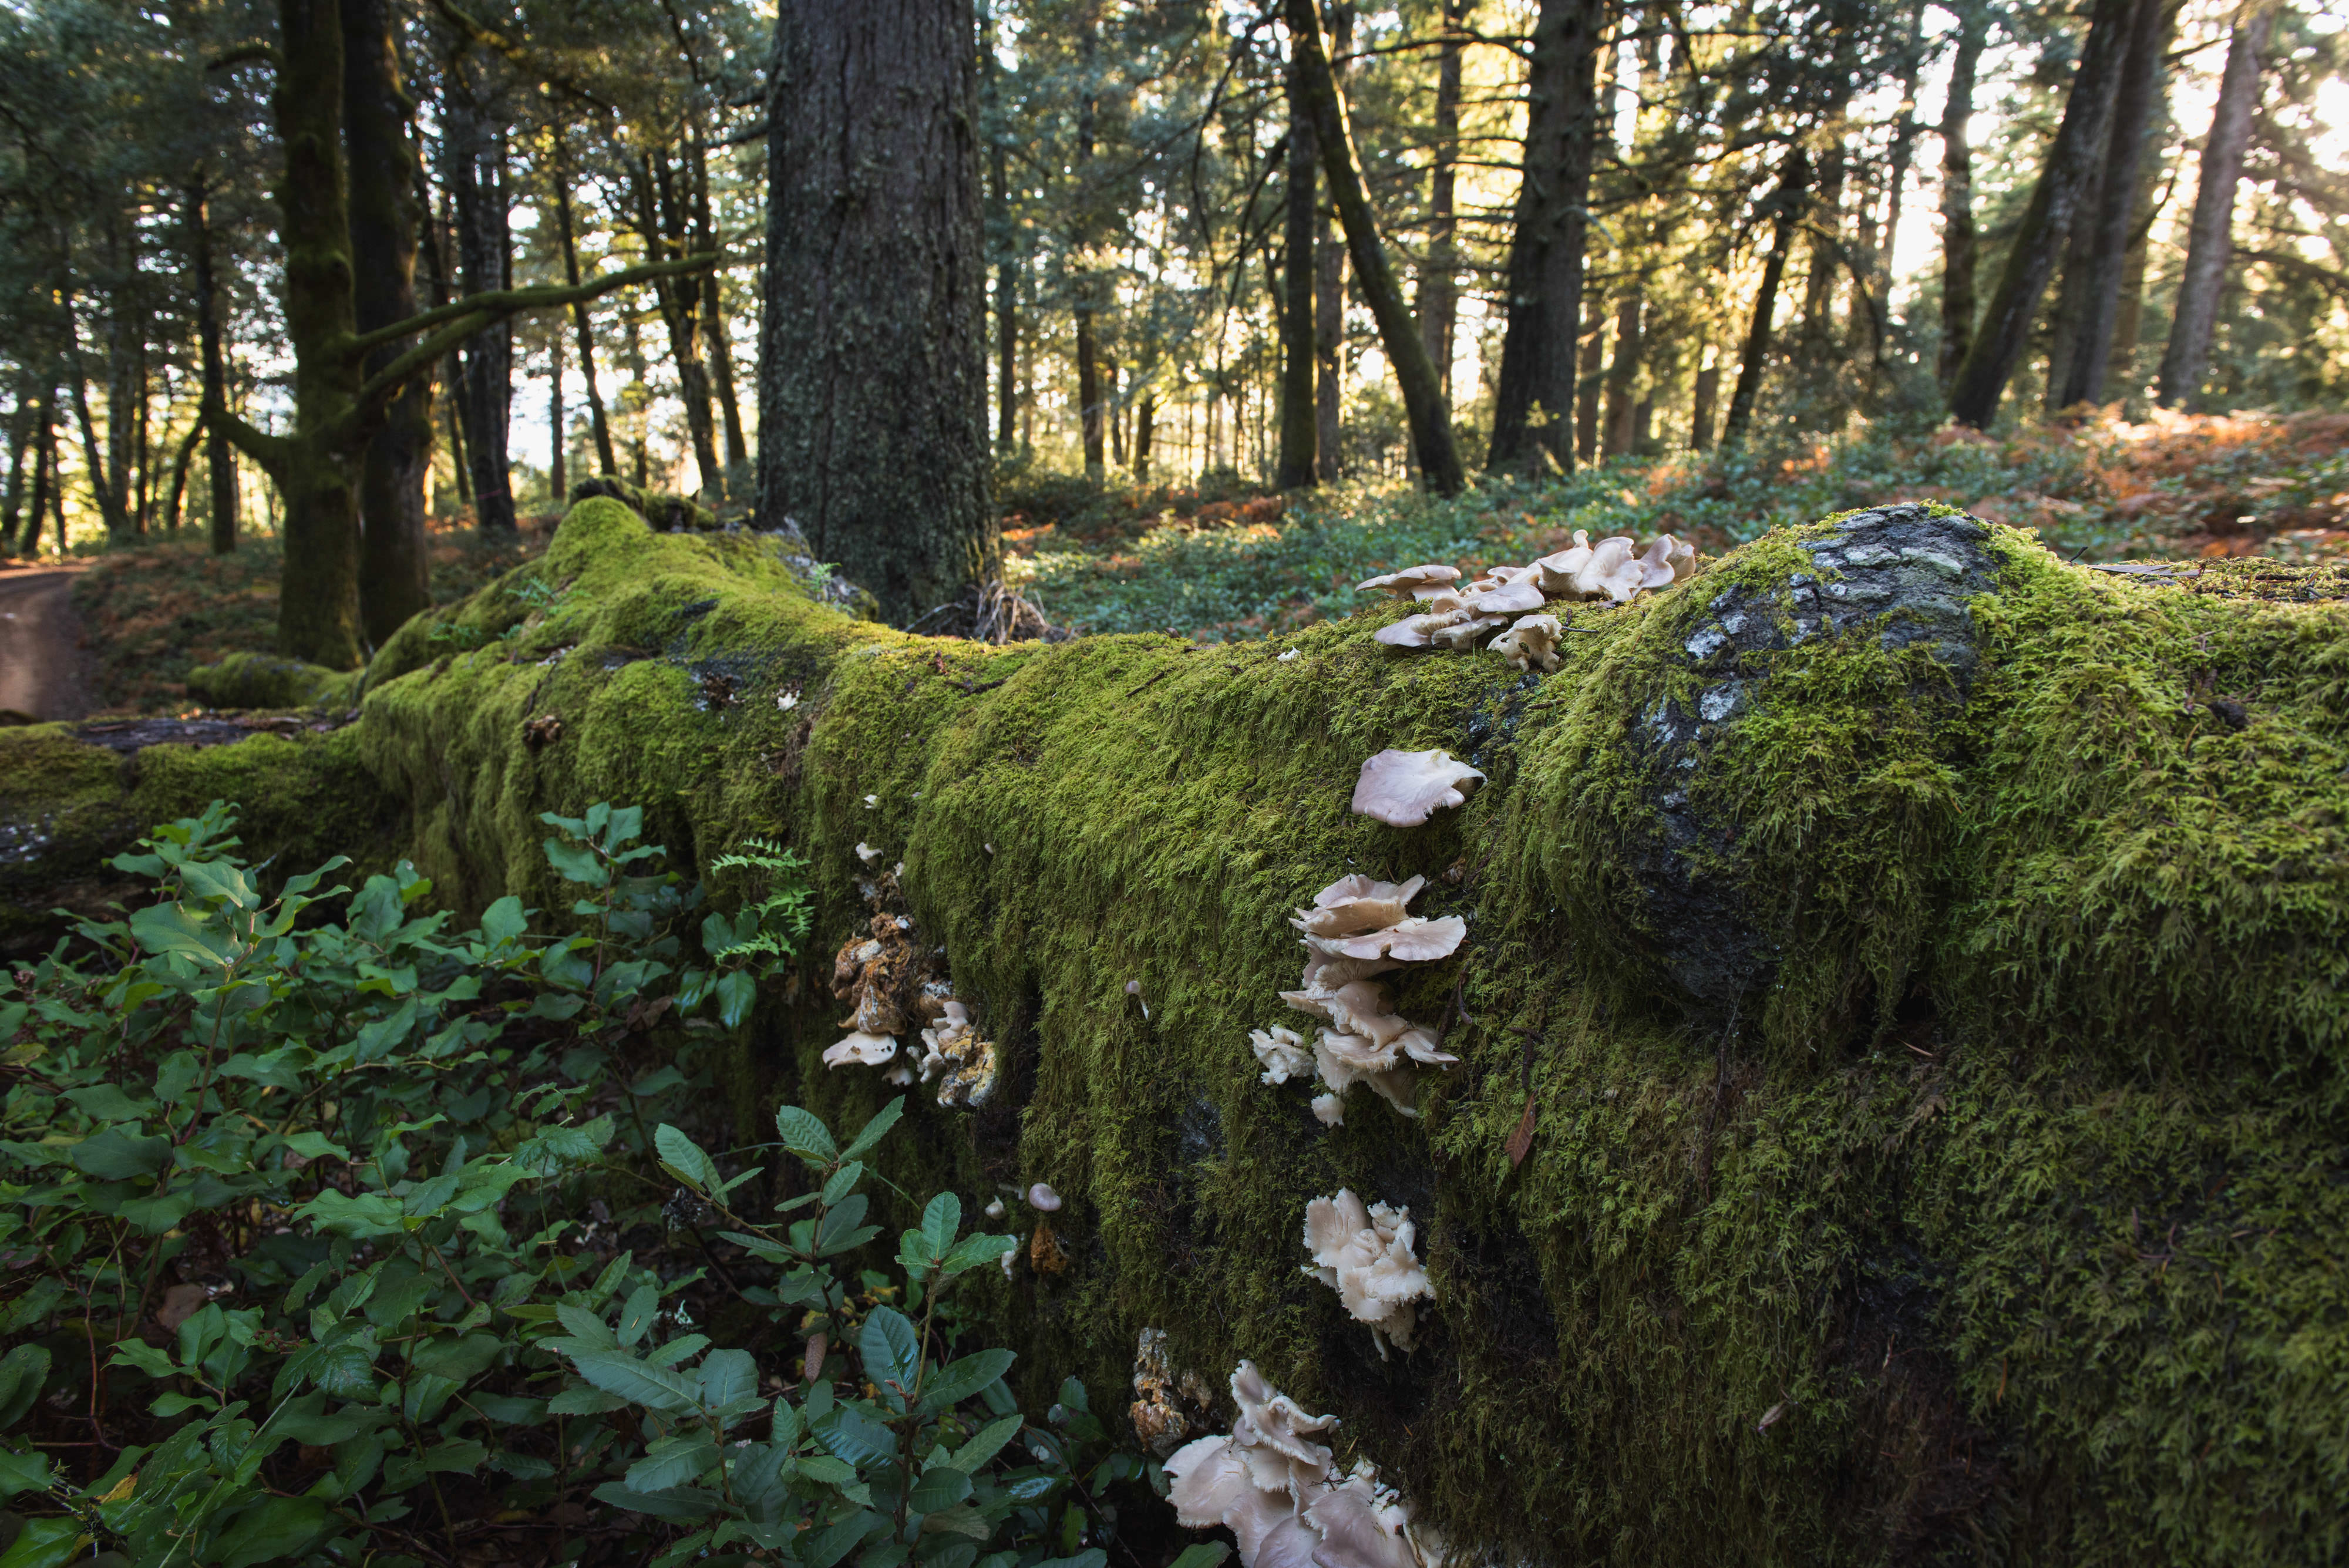 A close up of a mossy log in a pacific northwest forest.